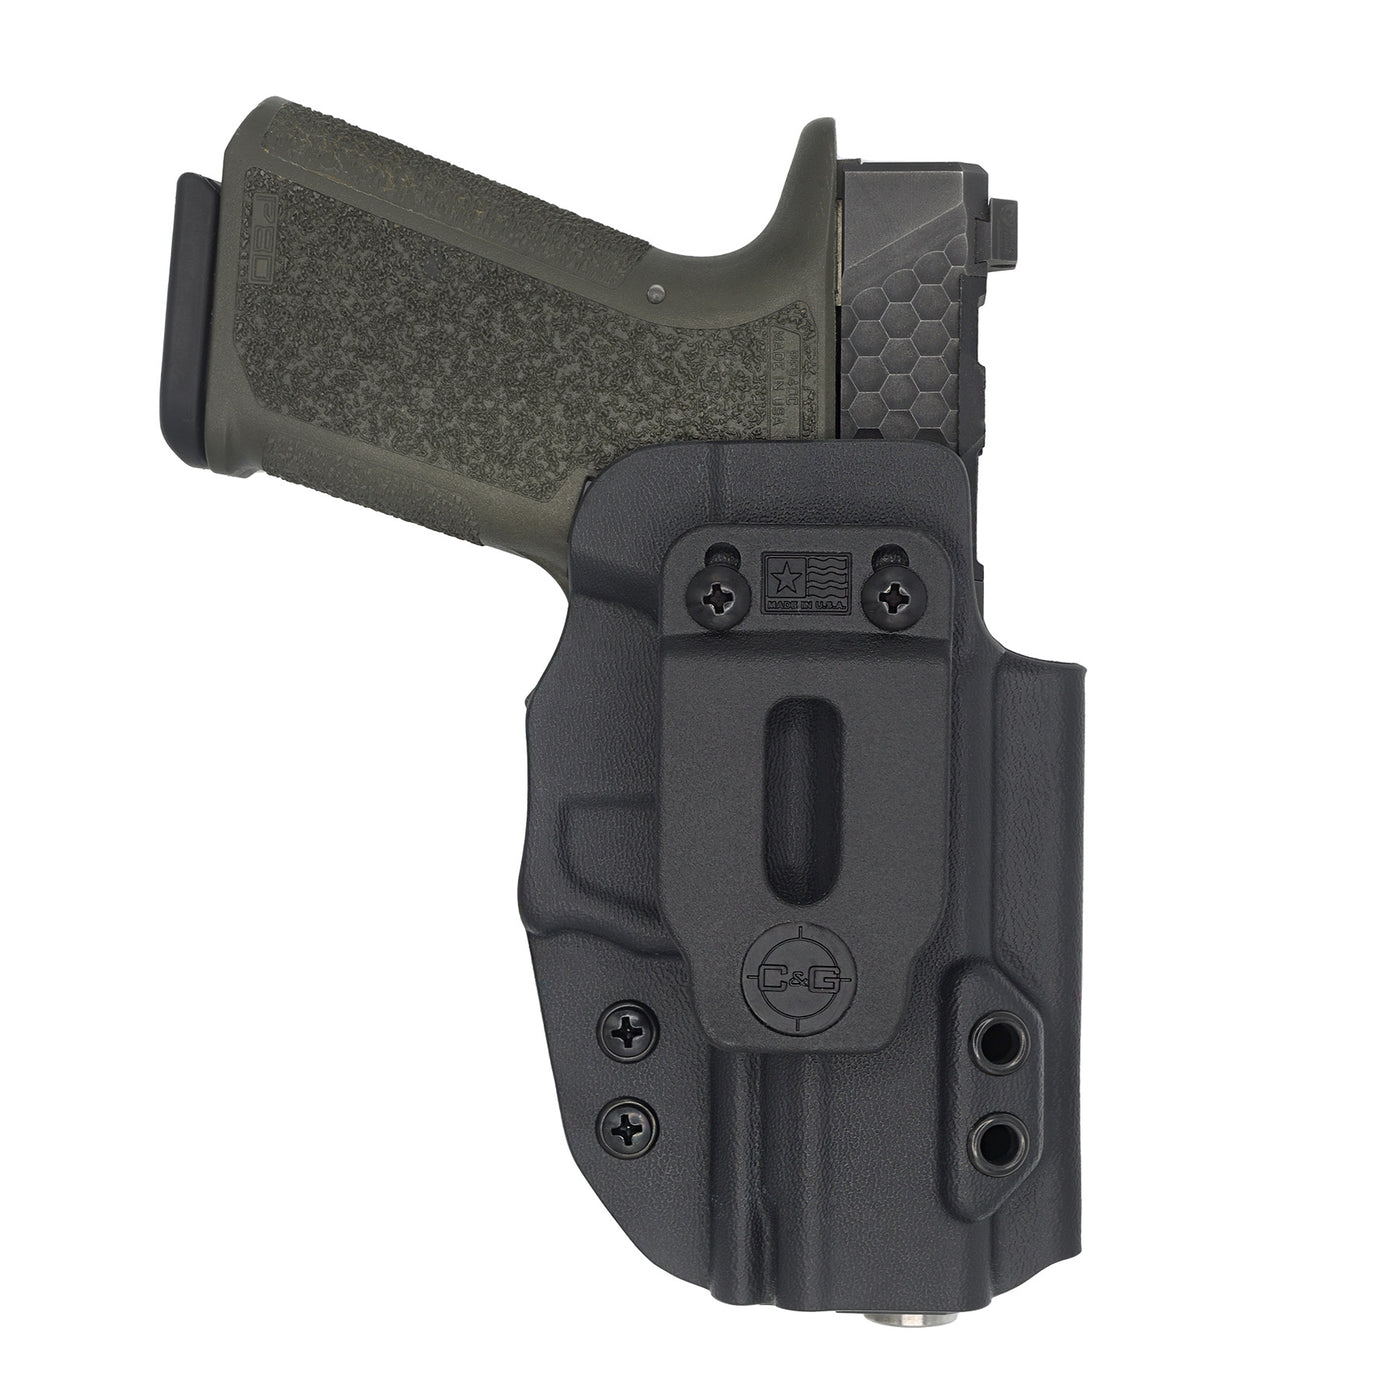 Shown is the custom C&G Holsters inside the waistband holster for the Poly80 PF940c. in holstered position